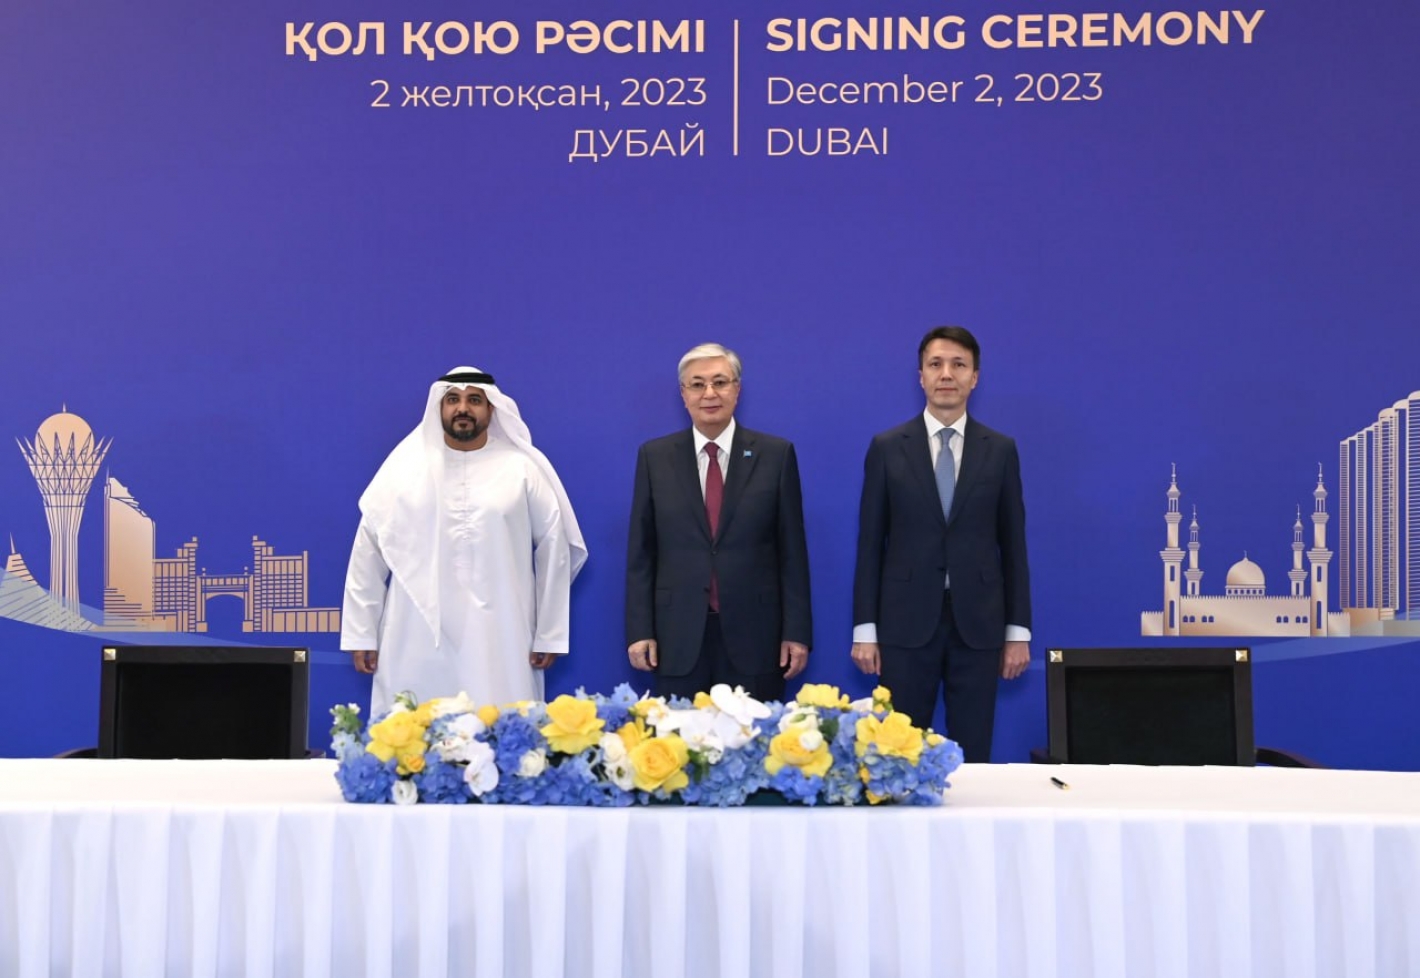 Kazatomprom signs a contract with Emirates Nuclear Energy Corporation for the supply of natural uranium concentrates